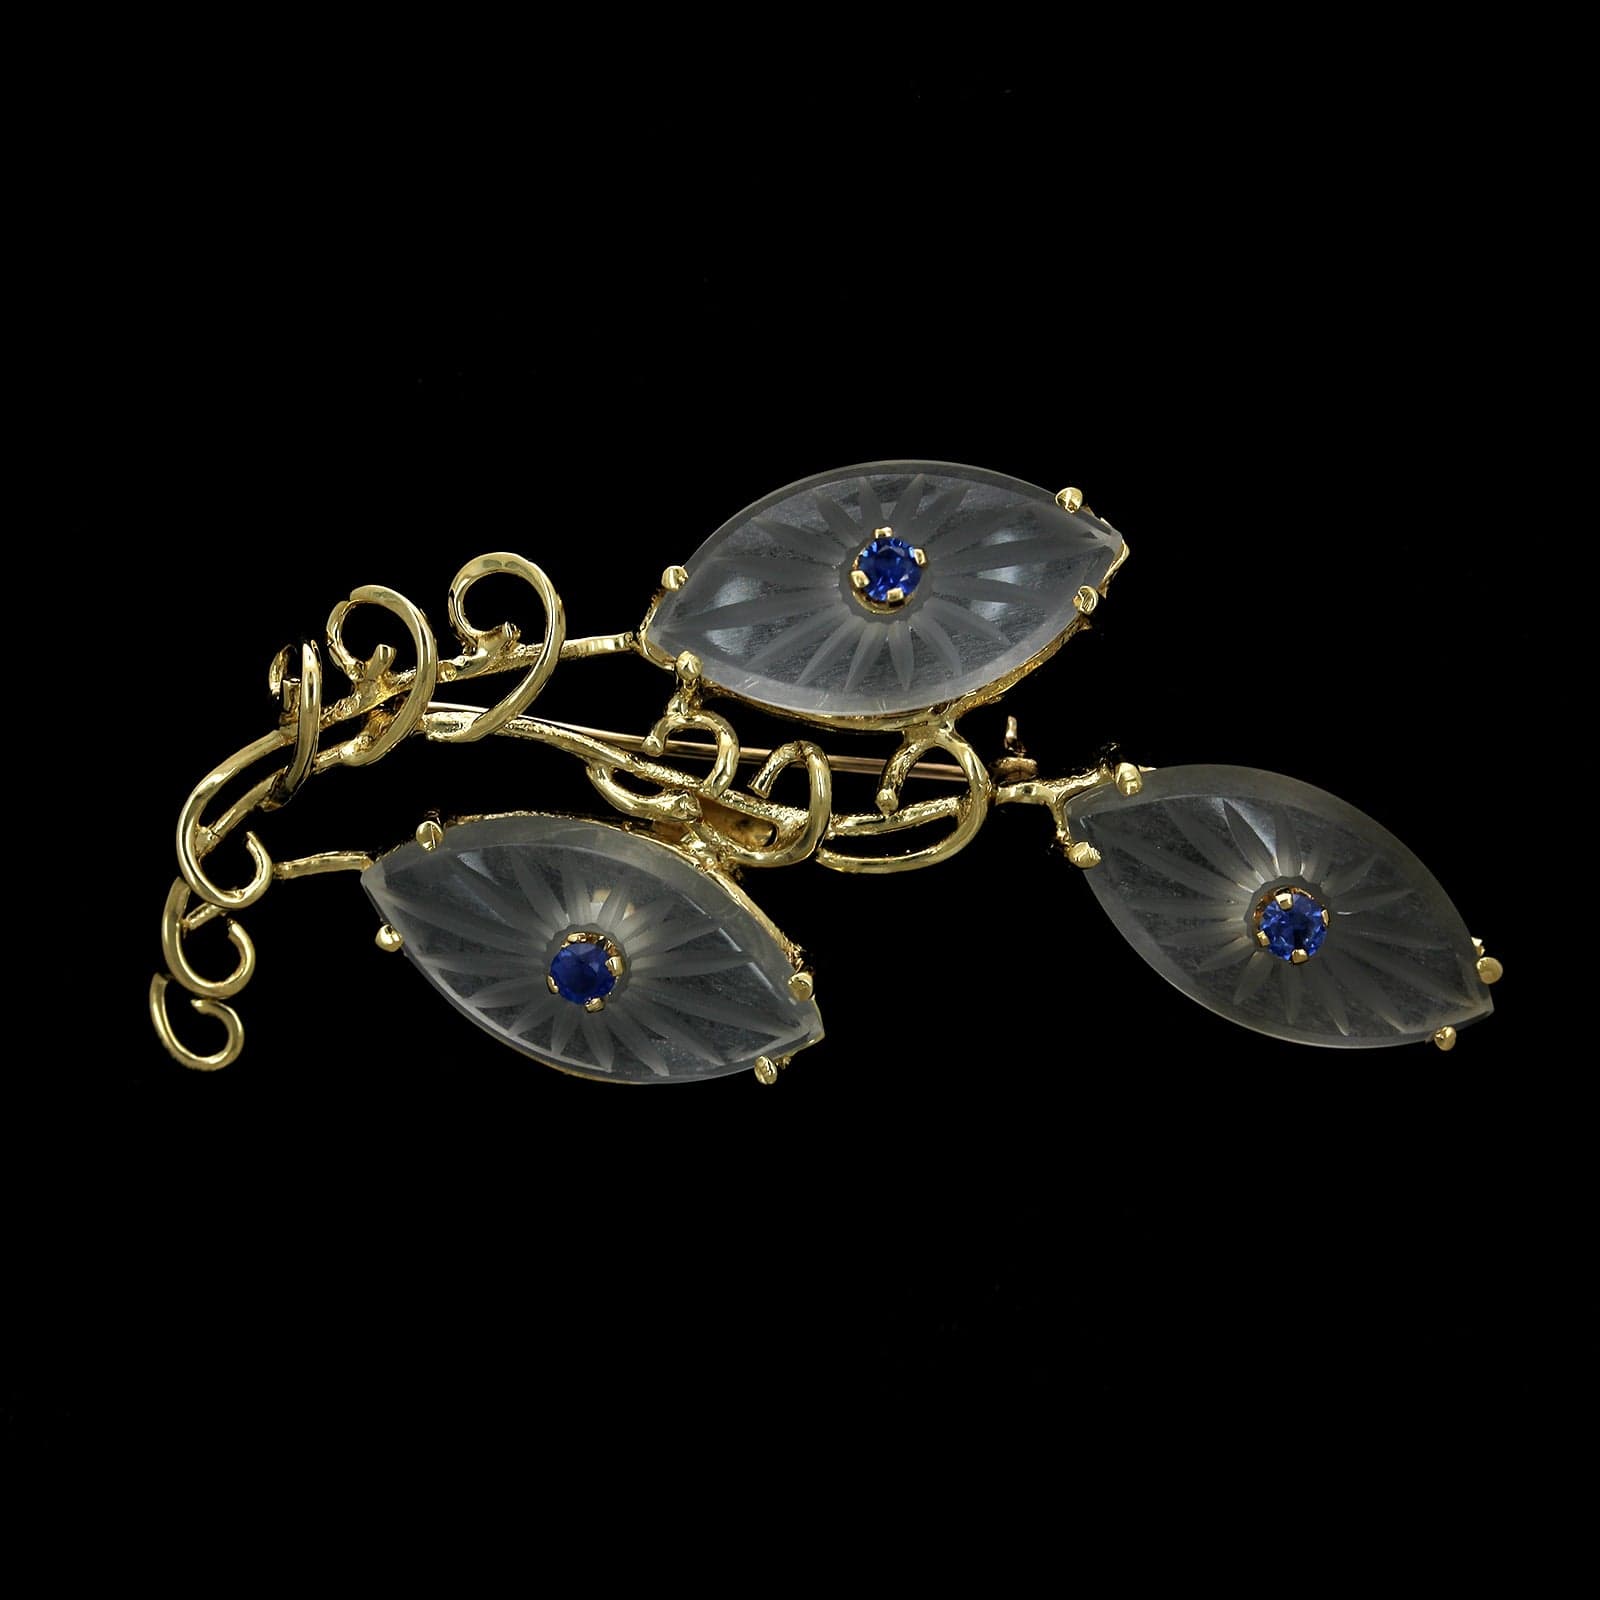 Moba 14K Yellow Gold Estate Carved Crystal and Sapphire Pin